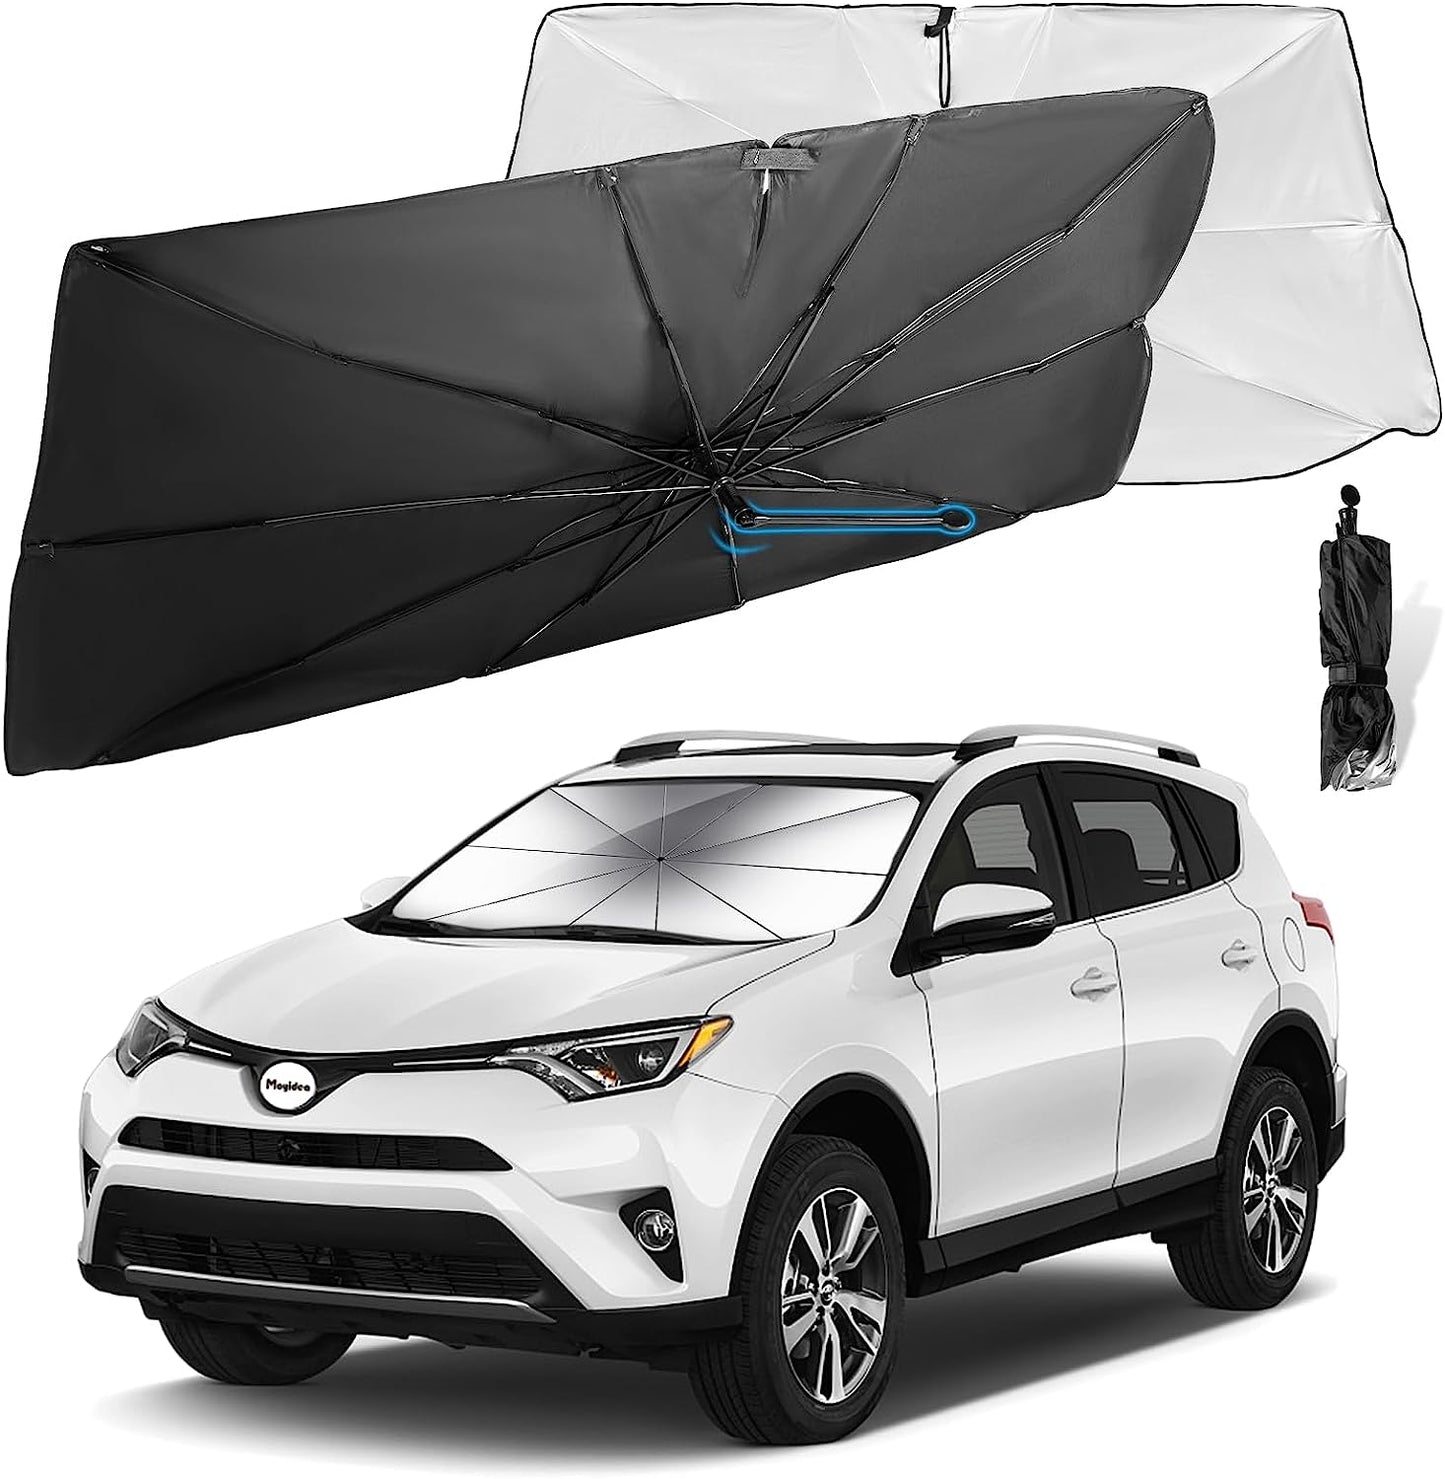 Car Windshield Sun Shade - Foldable Umbrella Reflective Sunshade for Car Front Window Block UV Rays and Heat Car Visor Keep Vehicle Cool Cover Most Cars, SUV, Truck for Auto Windshield